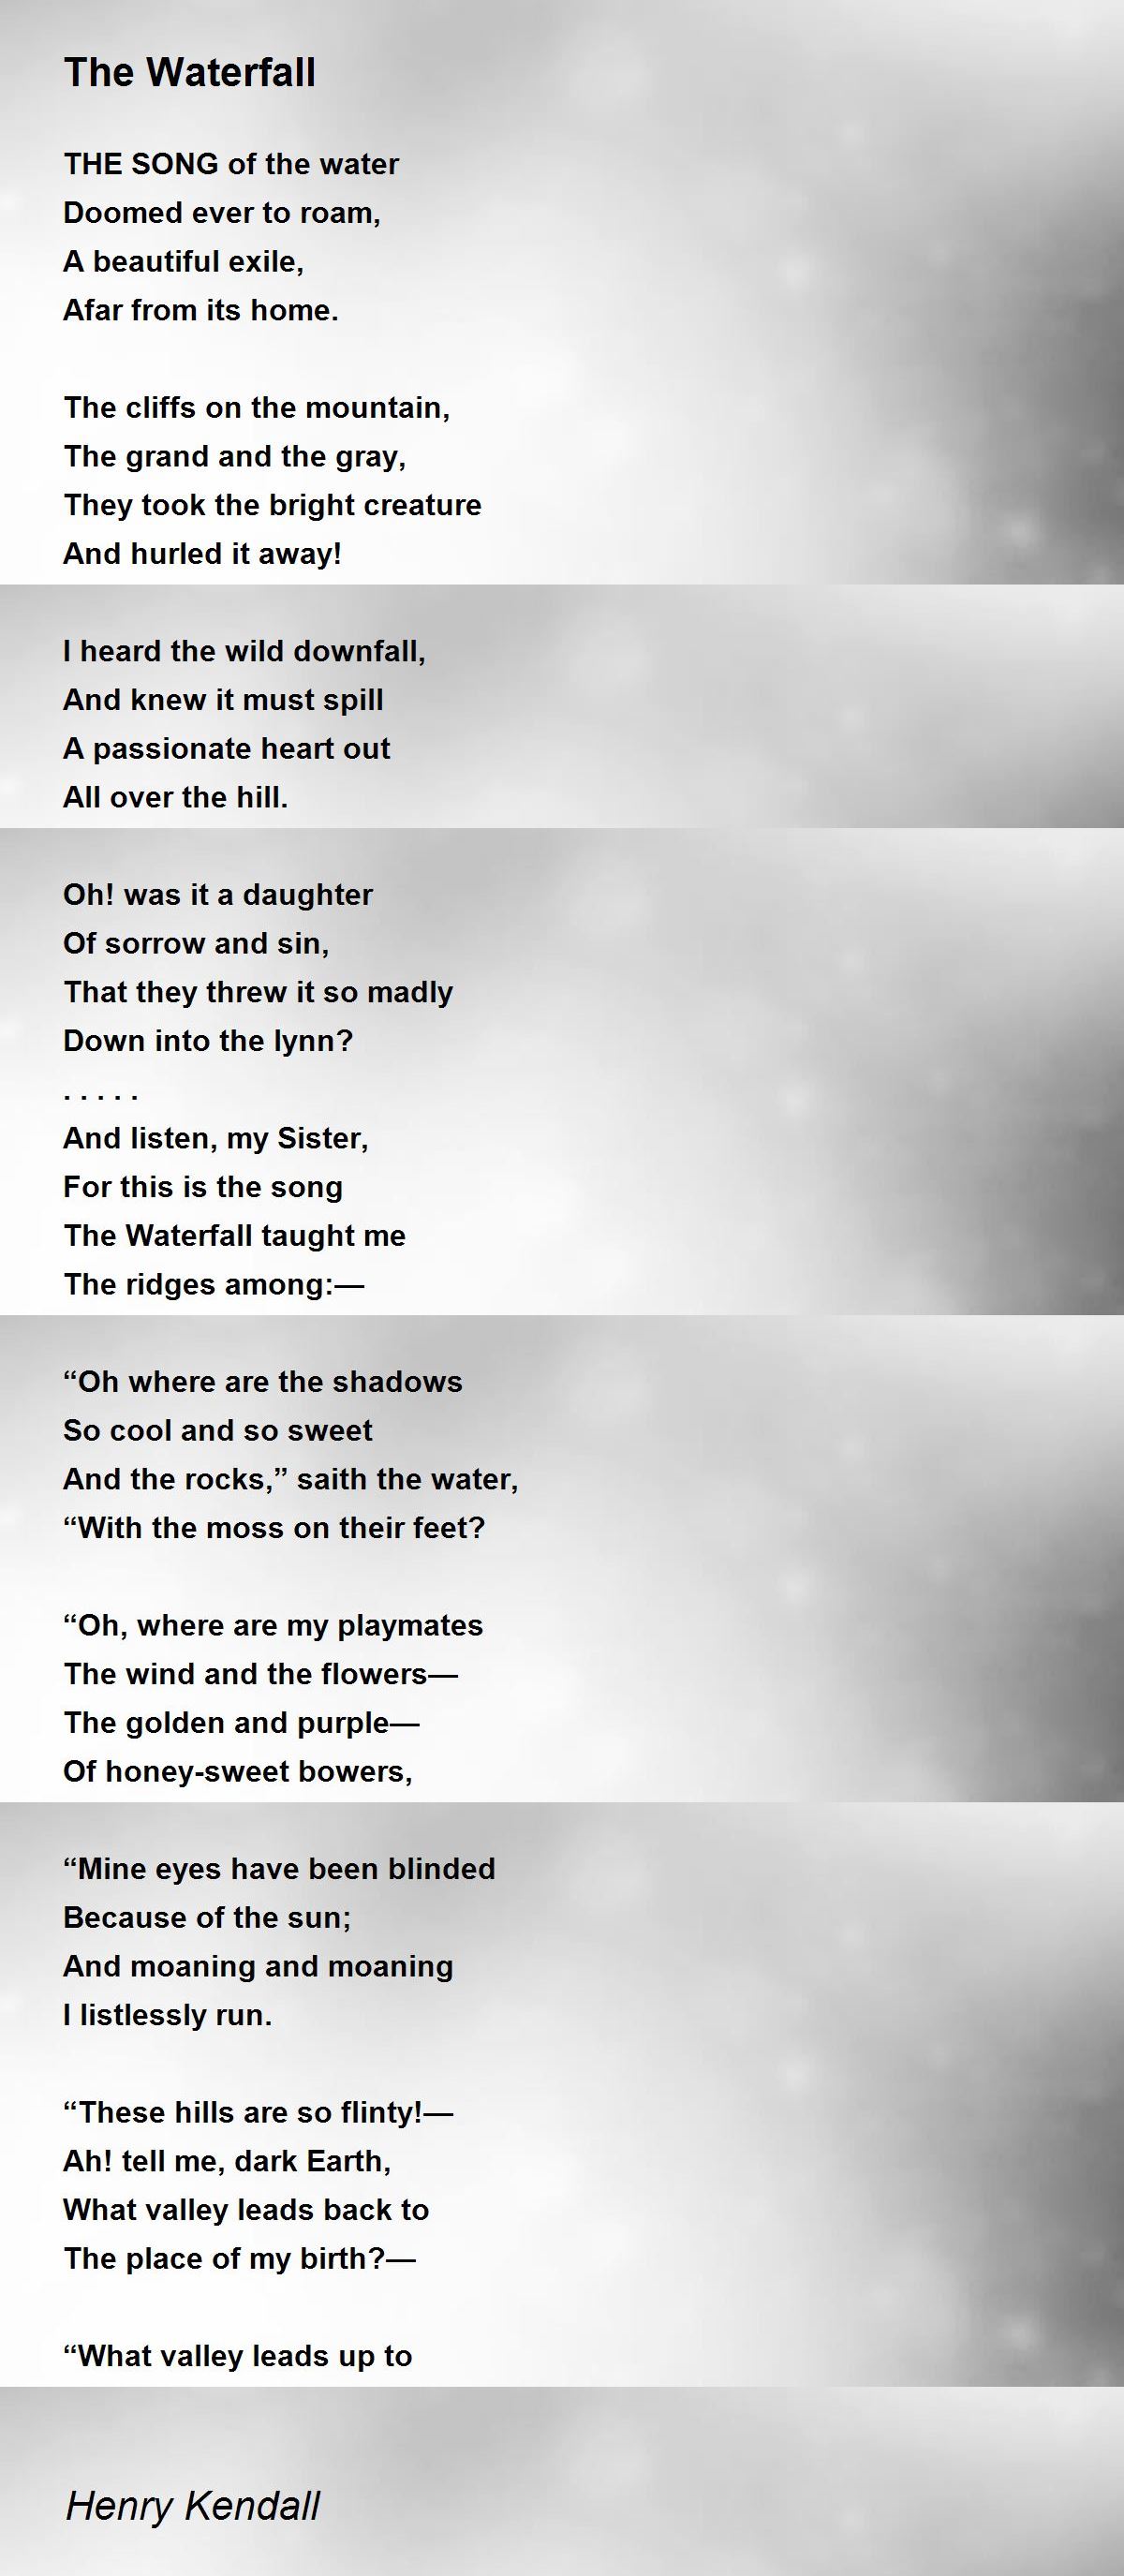 The Waterfall by Henry Kendall - The Waterfall Poem